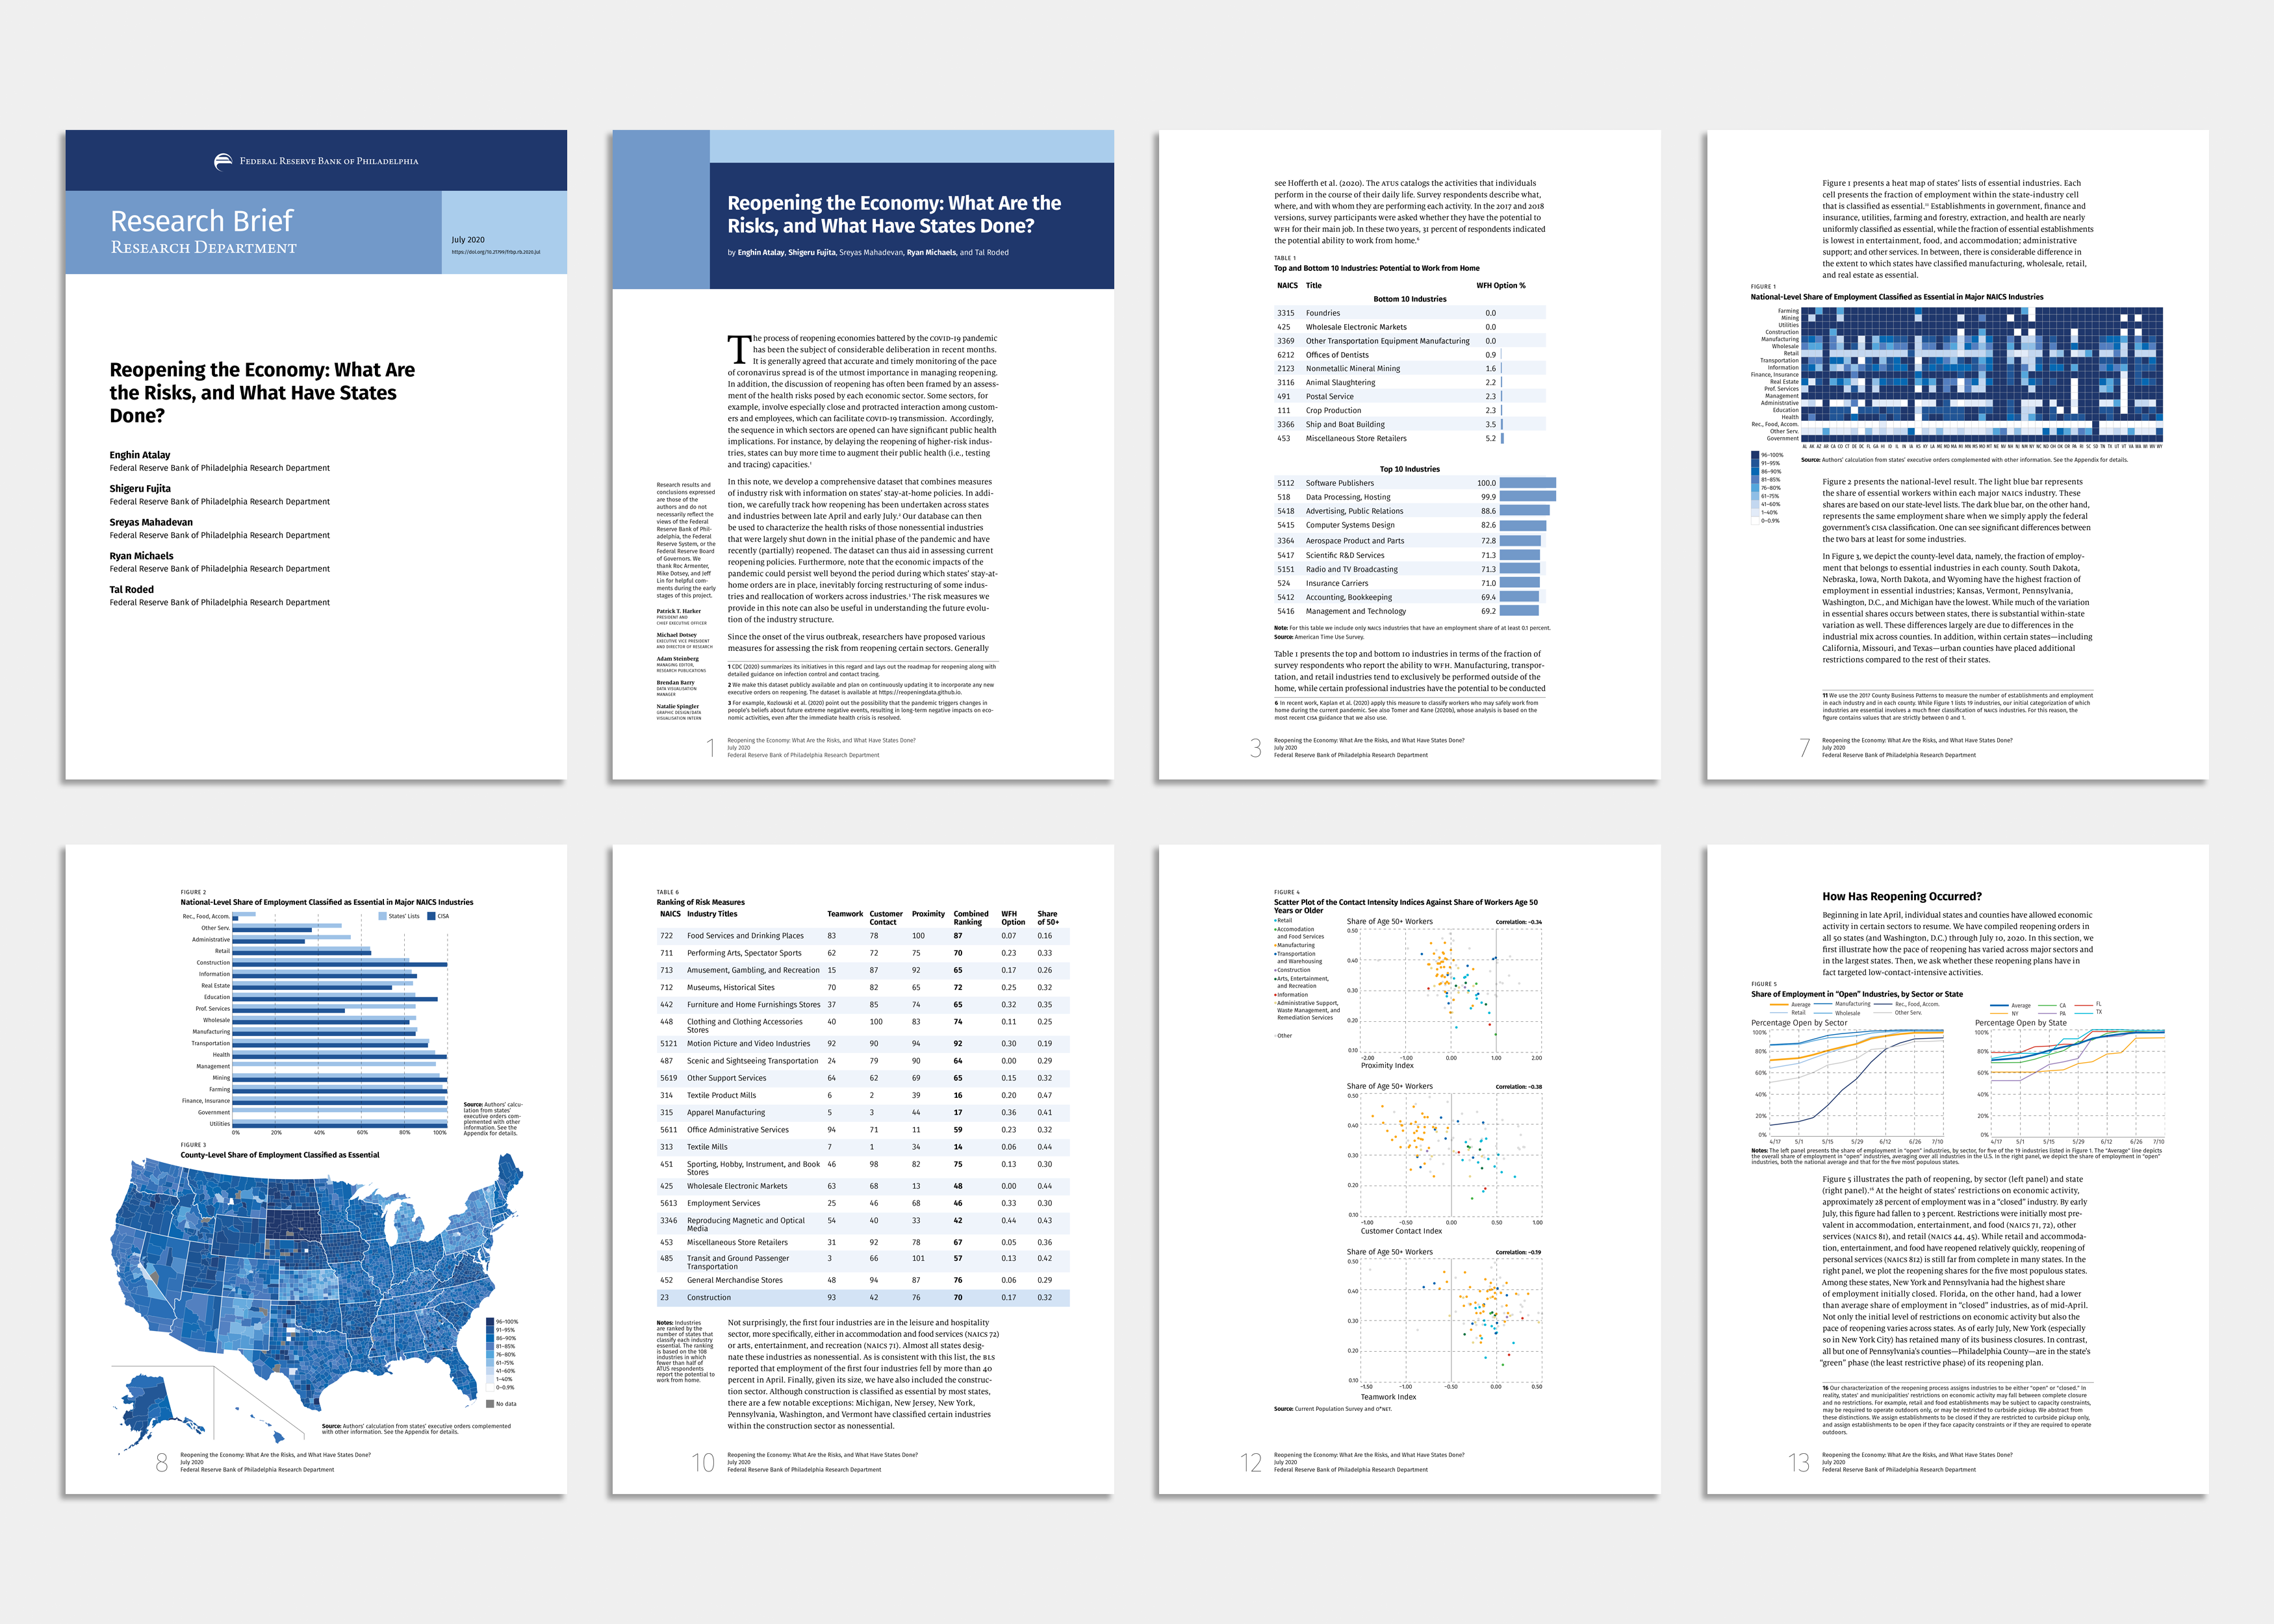 Selection of pages from the Reopening the Economy Research Brief